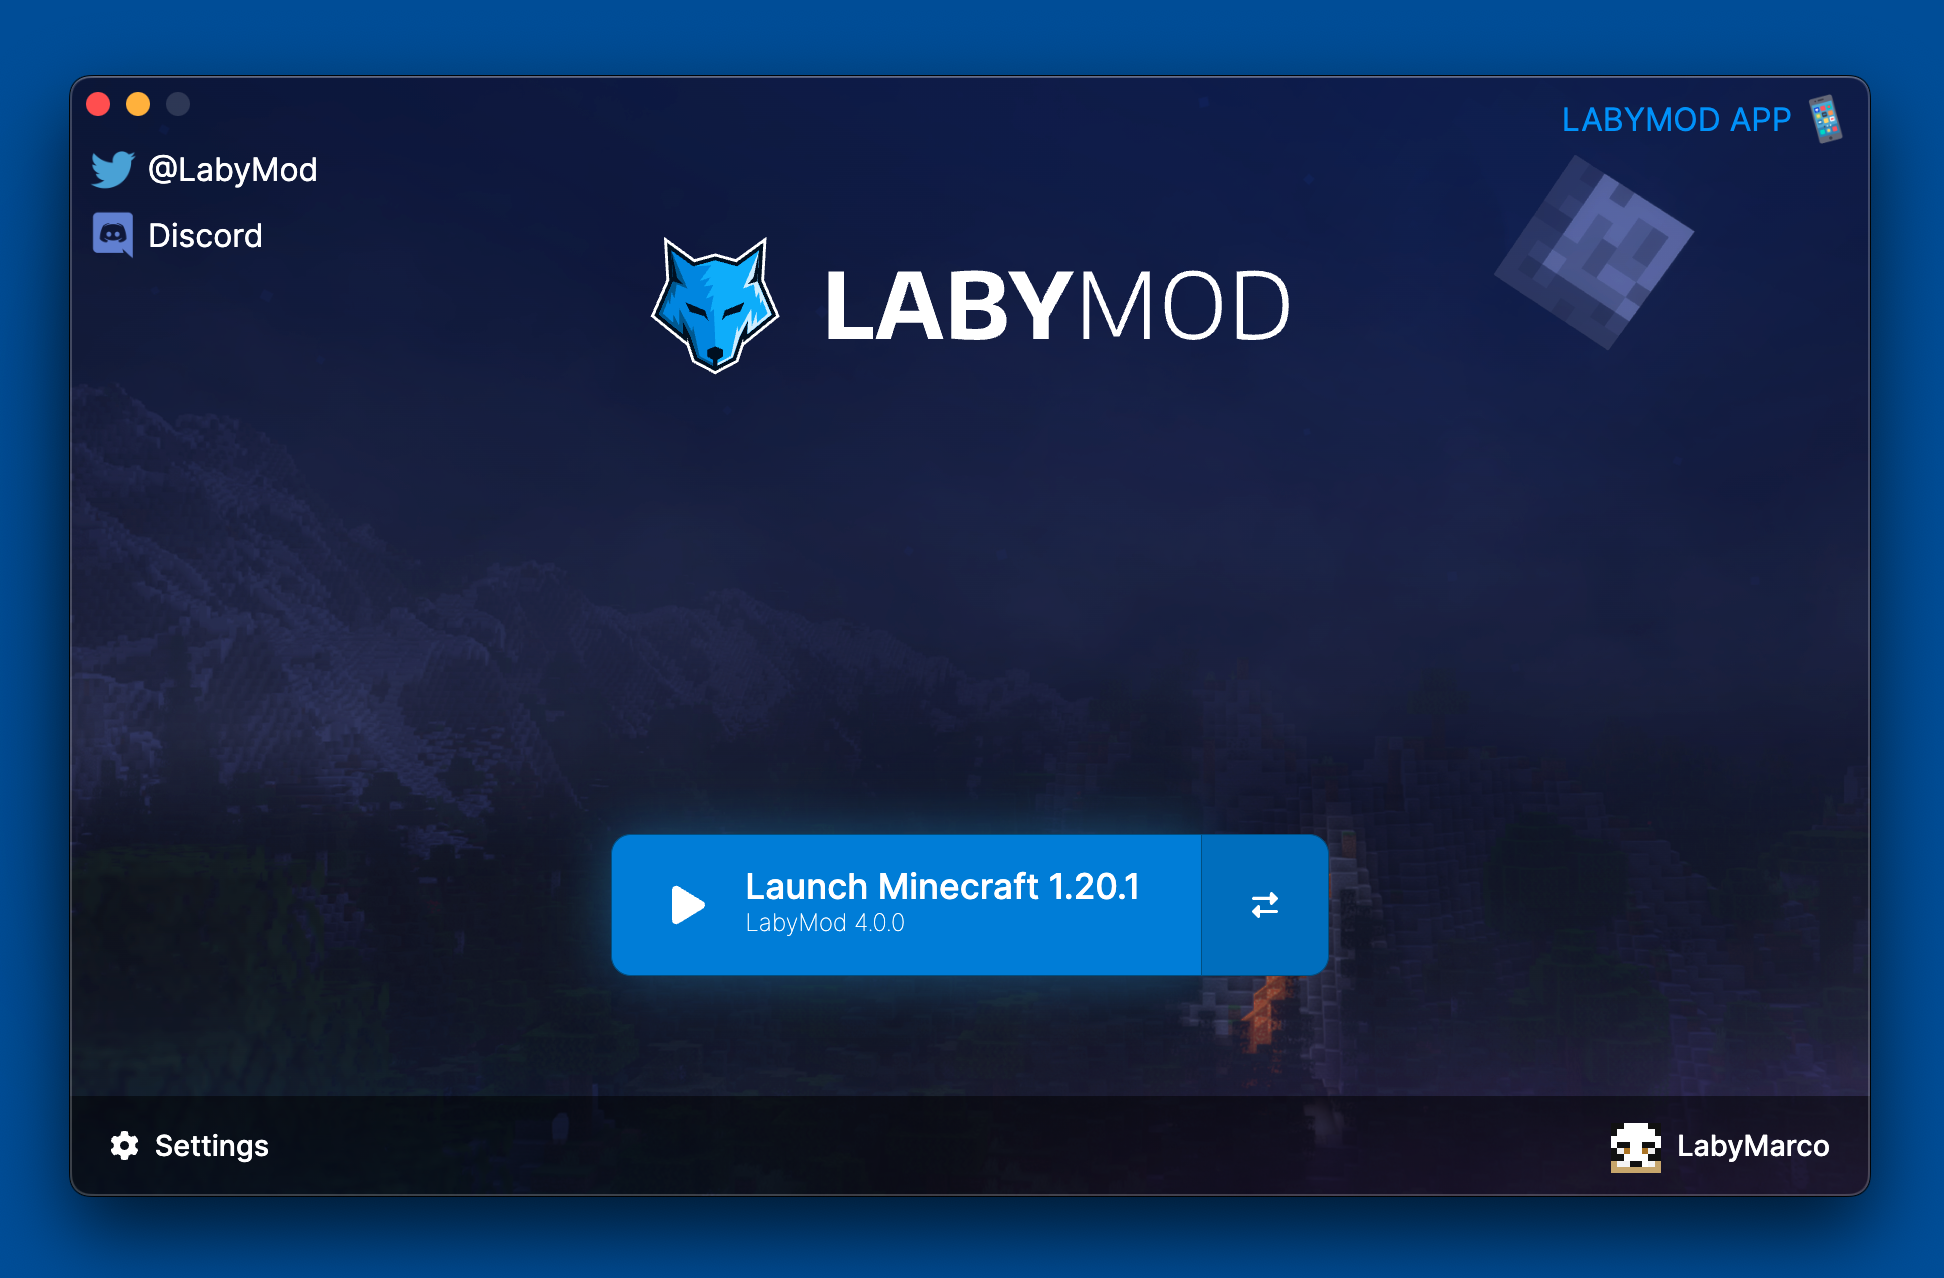 The LabyMod Launcher